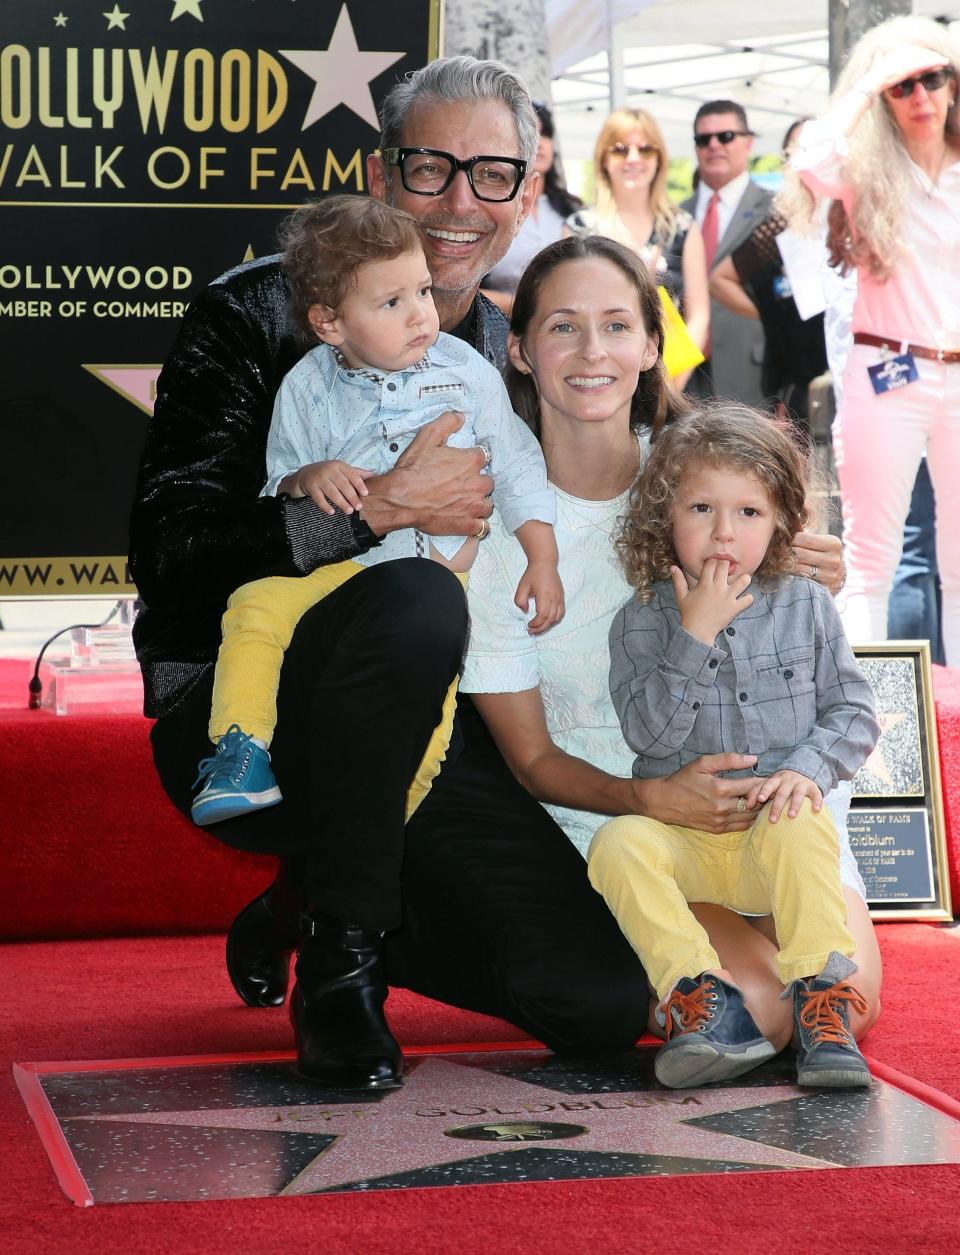 A photo of Jeff Goldblum with his wife and their two sons